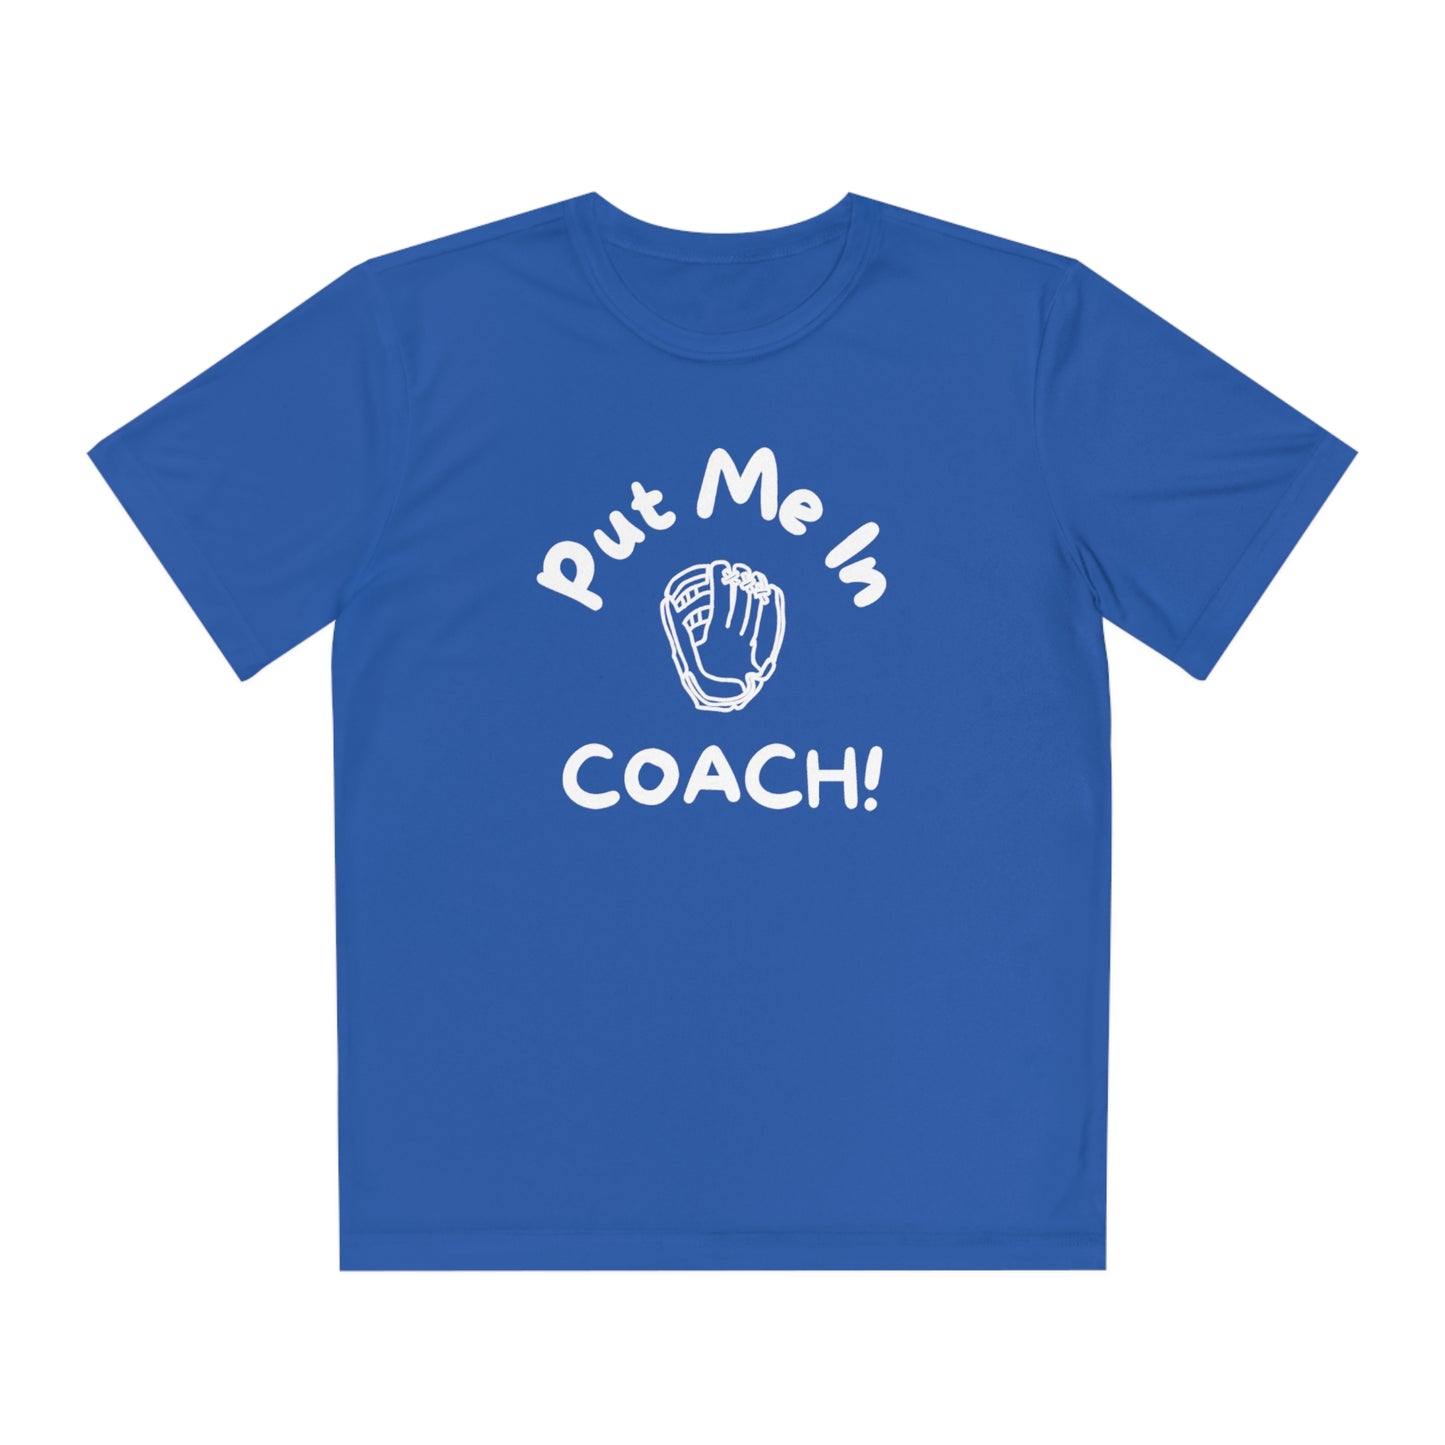 Put Me In Coach Youth Competitor Tee